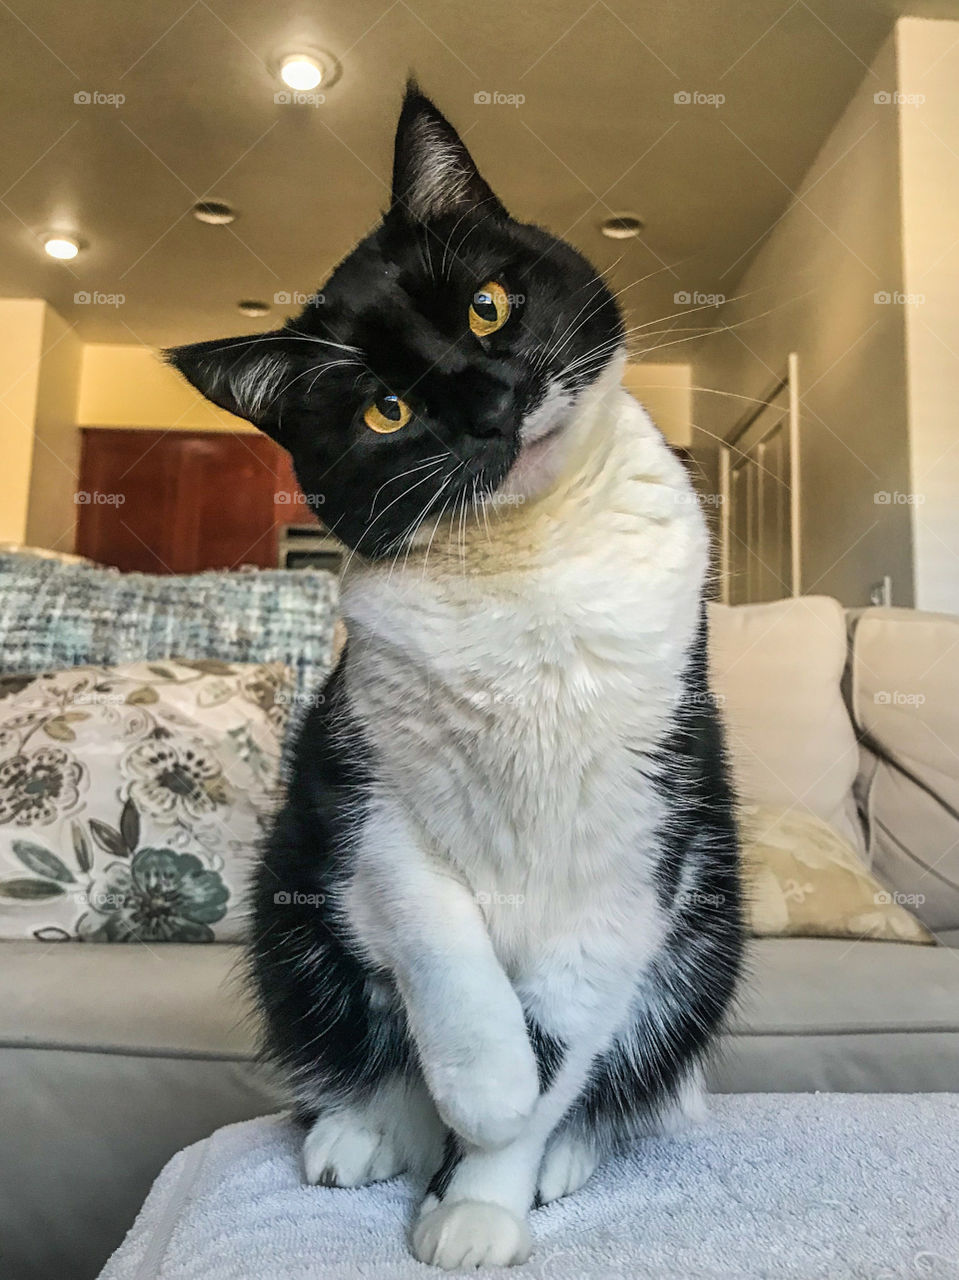 Cute tuxedo kitty tilting her head while sitting on furniture